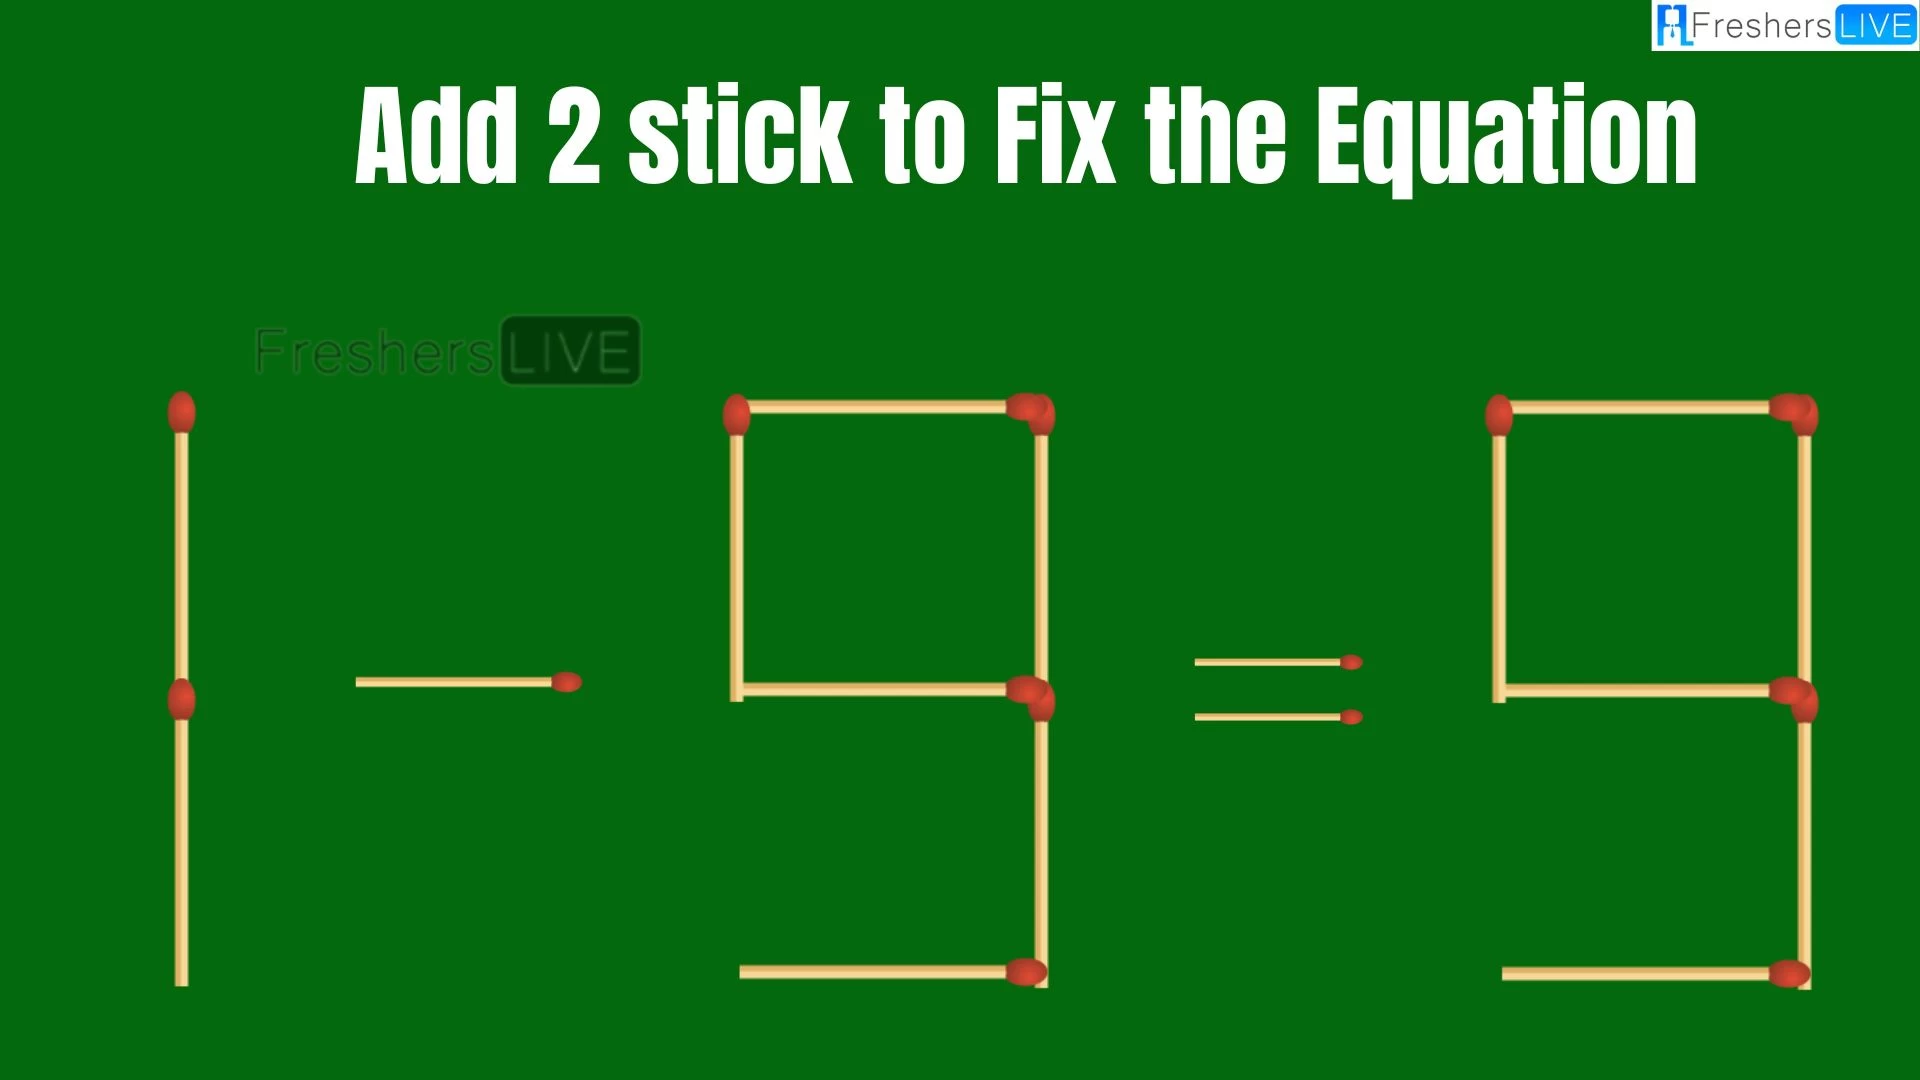 Solve the Puzzle to Transform 1-9=9 by Adding 2 Matchsticks to Correct the Equation